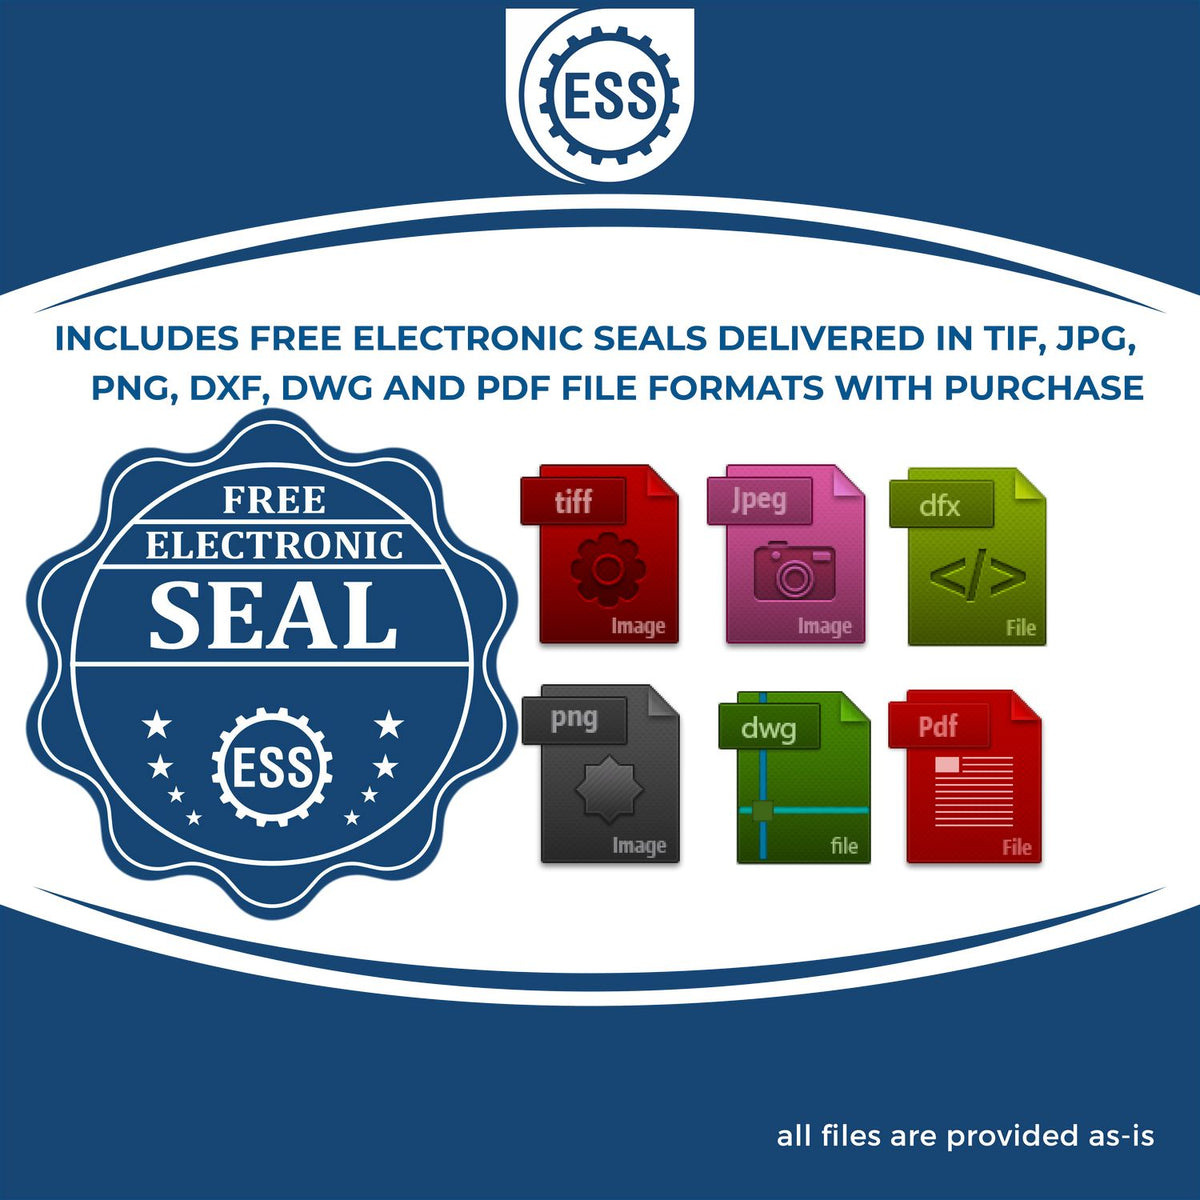 An infographic for the free electronic seal for the Slim Pre-Inked Maryland Professional Engineer Seal Stamp illustrating the different file type icons such as DXF, DWG, TIF, JPG and PNG.